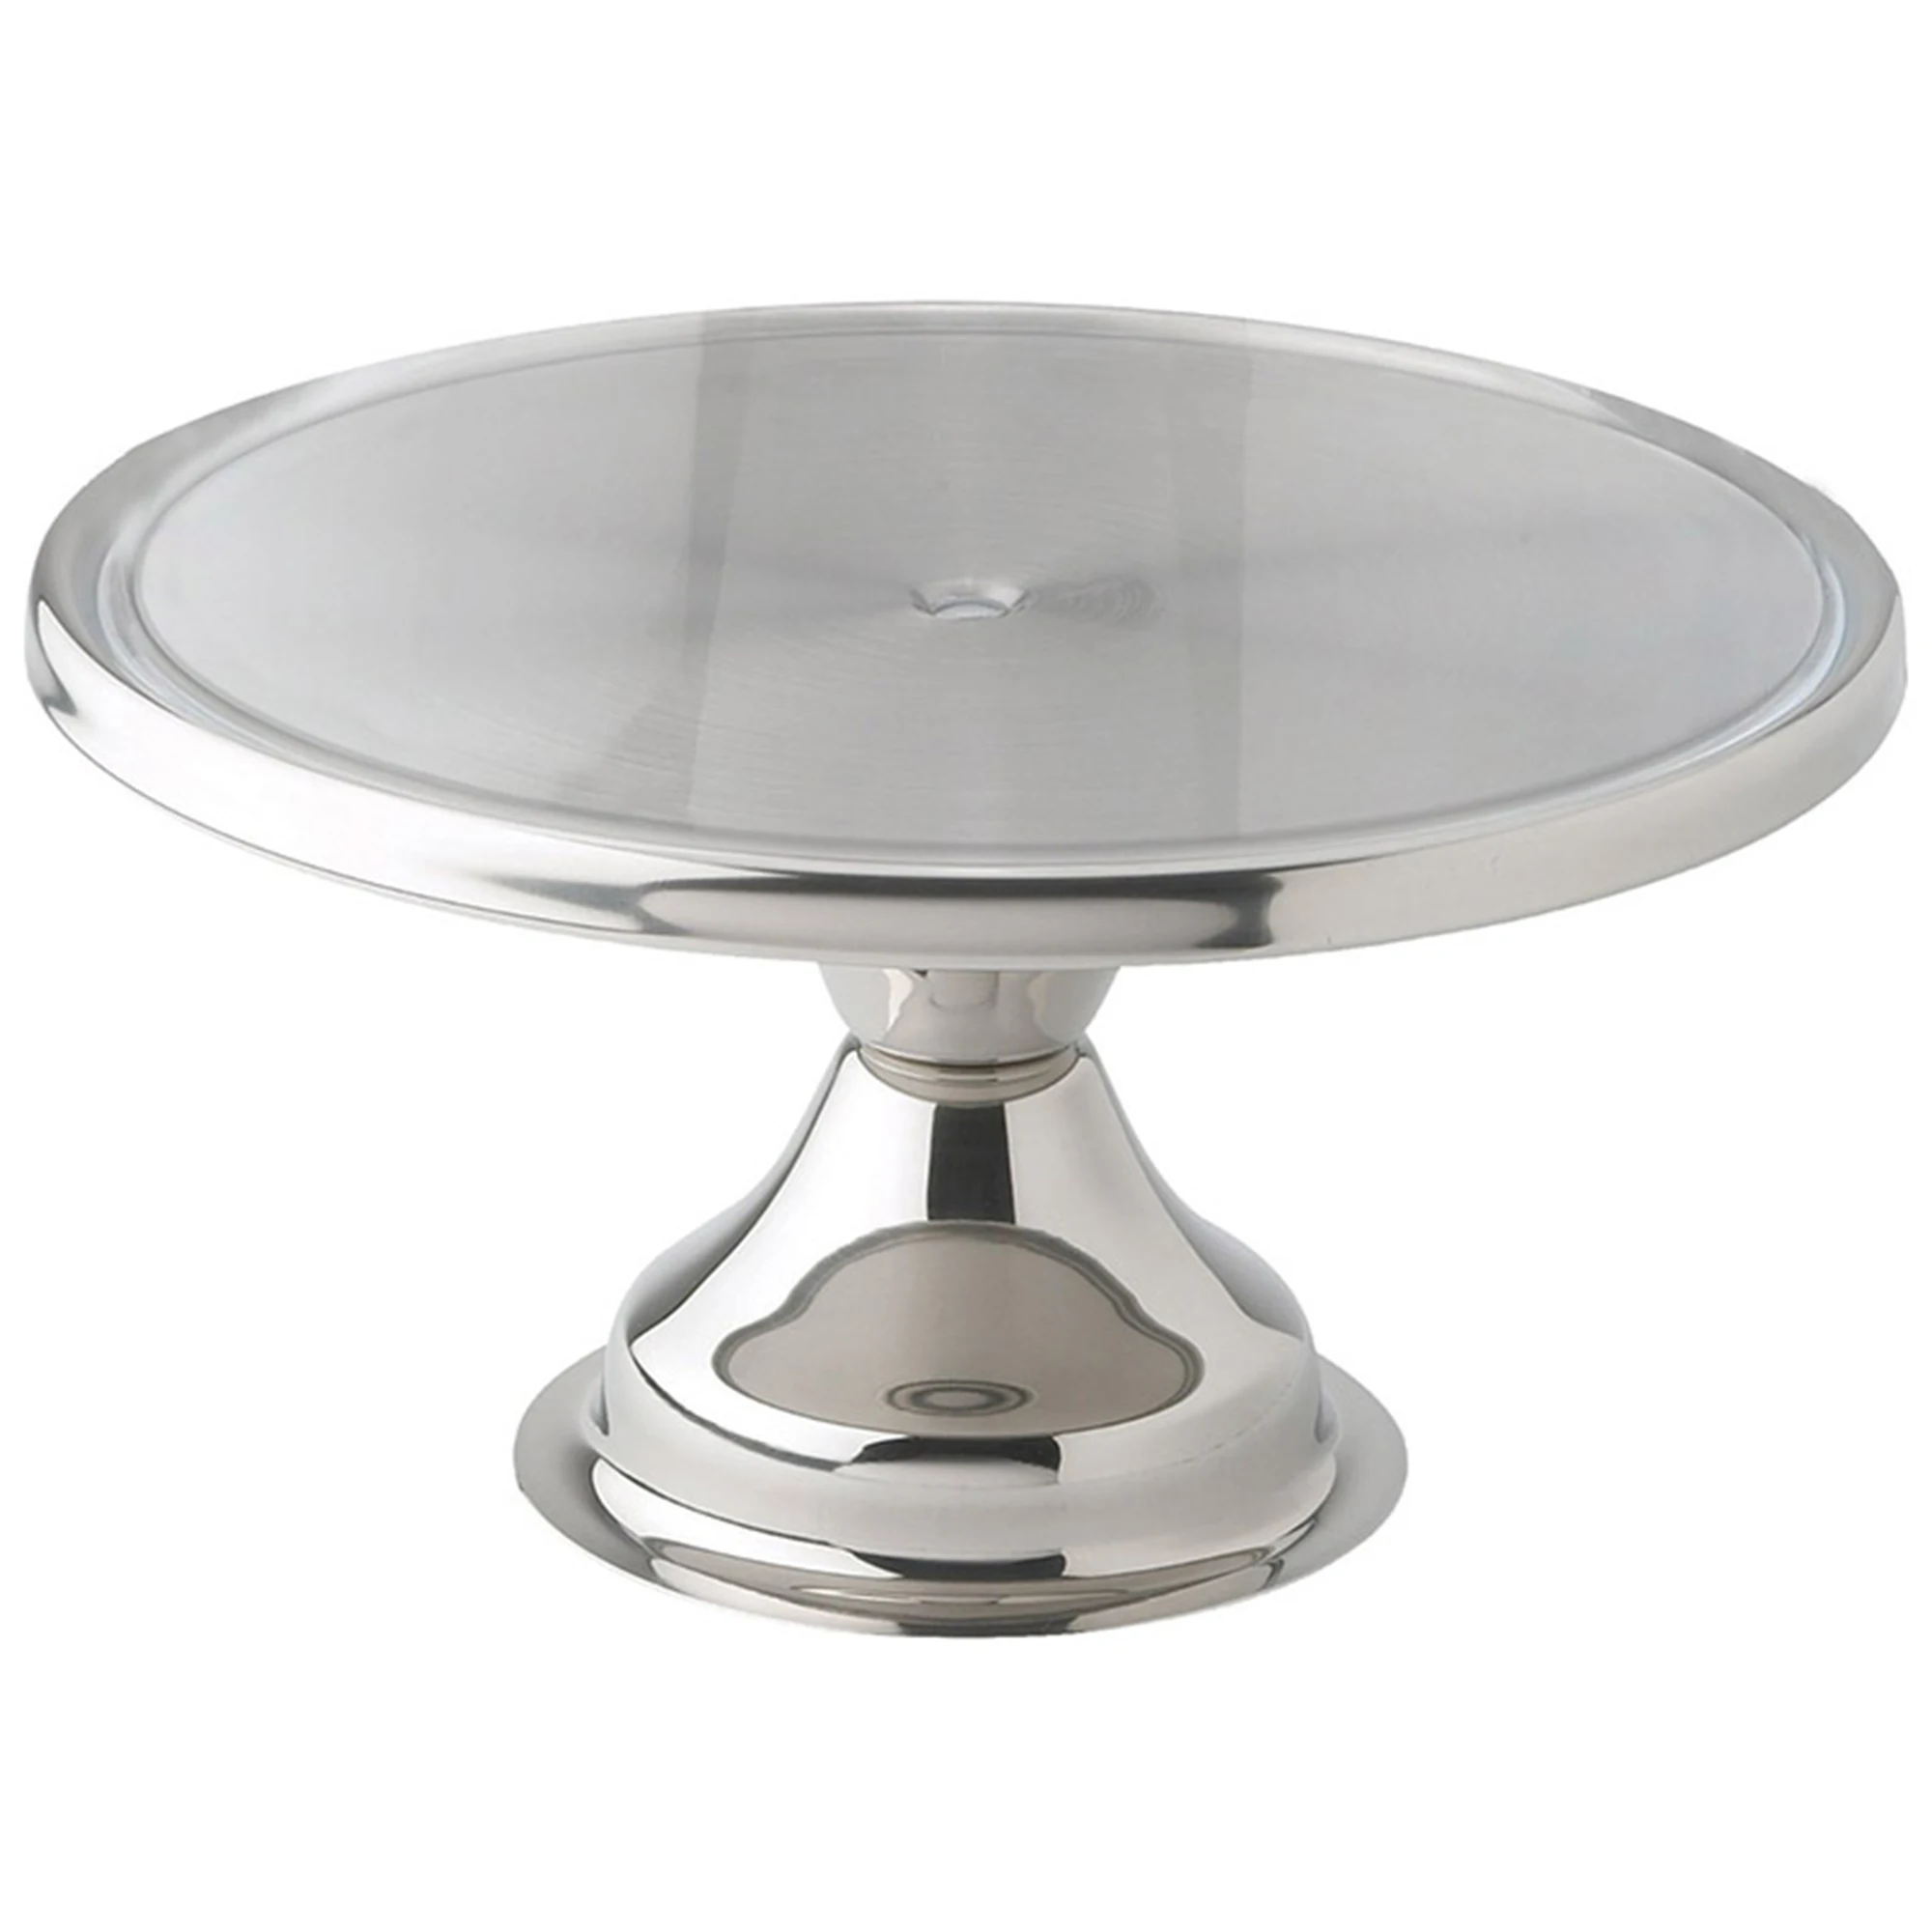 

13inch Stainless Steel Cake Stand CKS-13, Set of 3